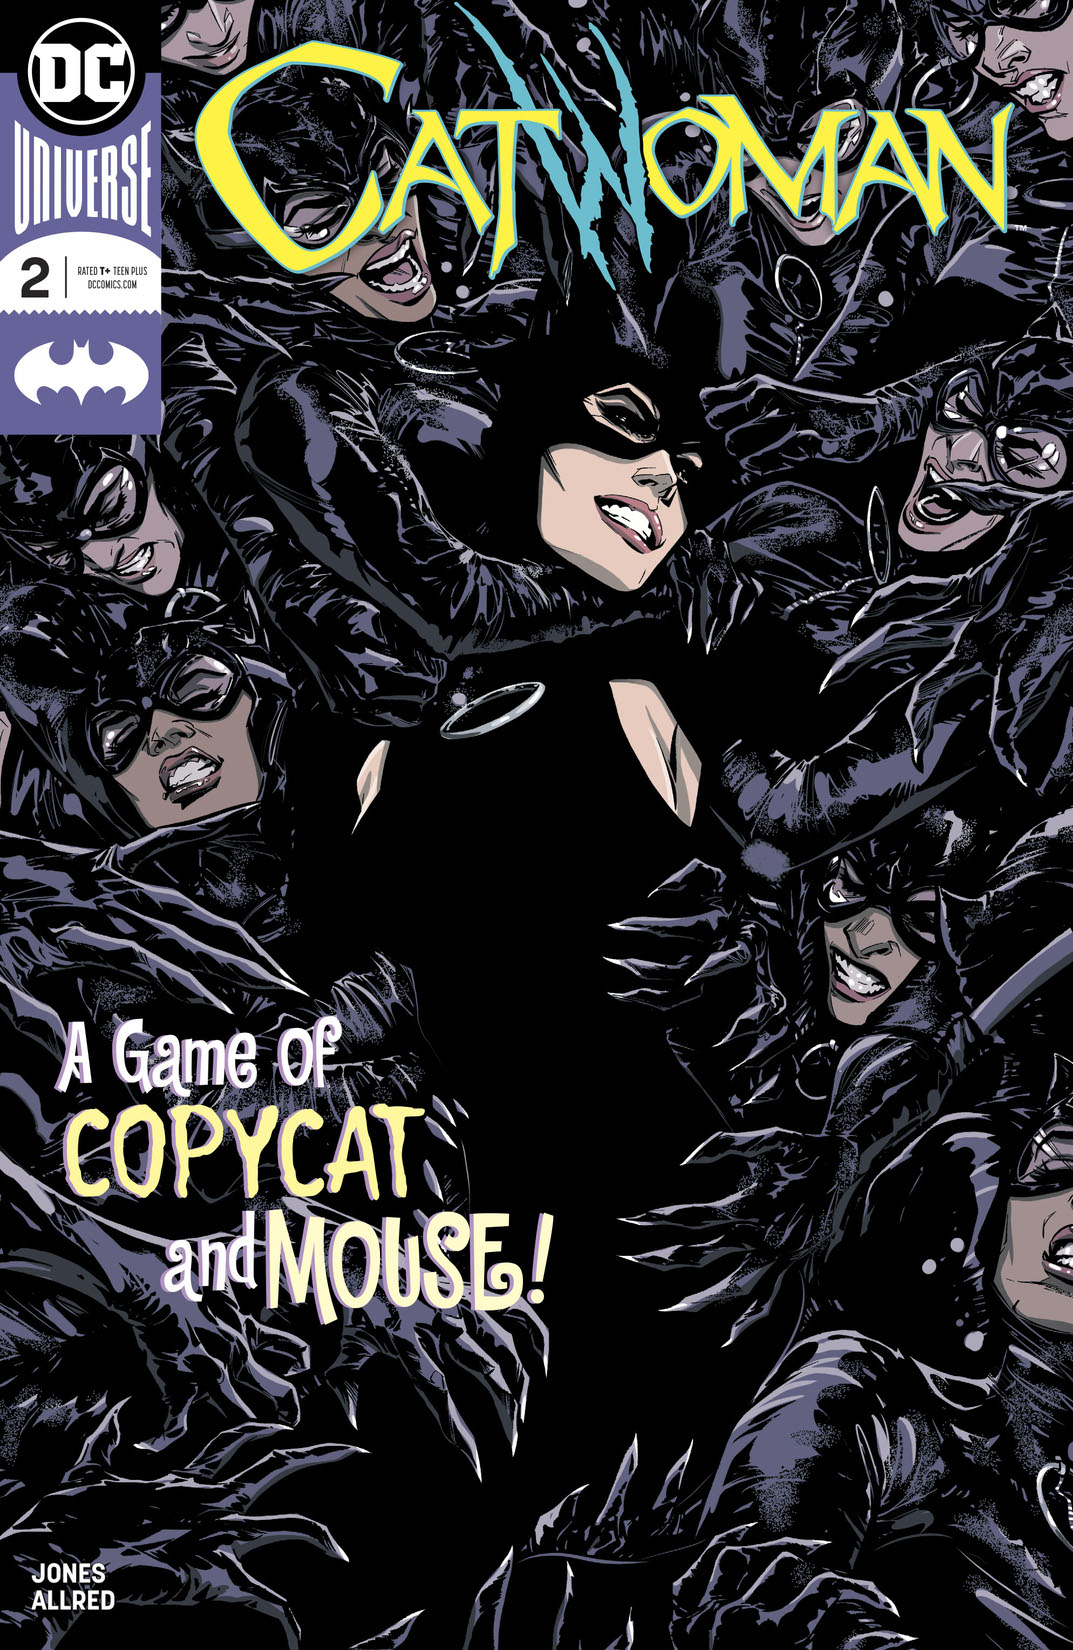 Catwoman (2018-) #2 preview images